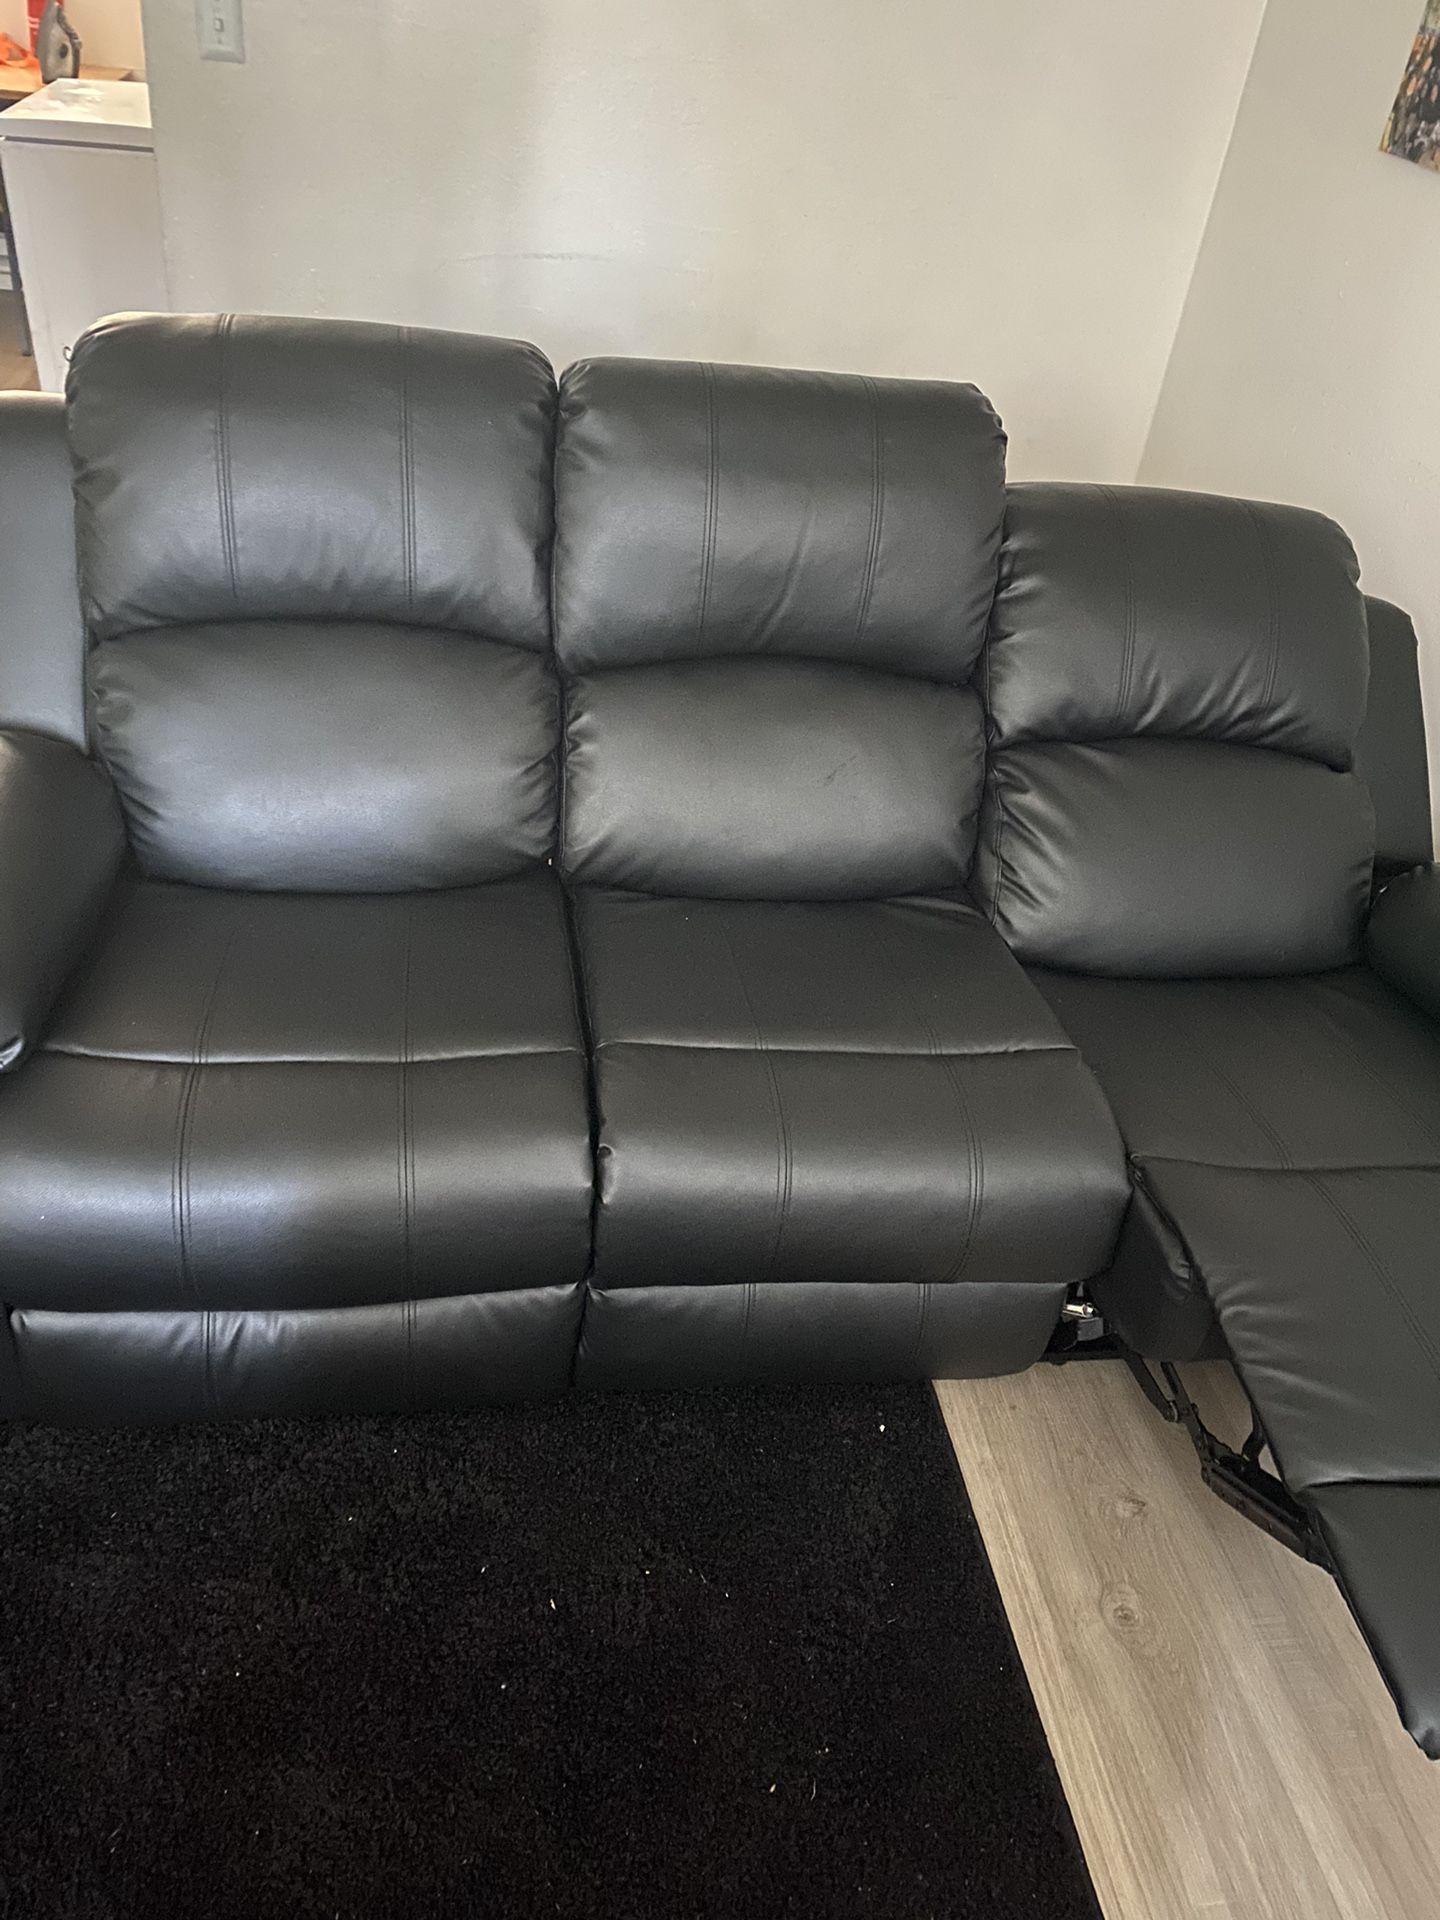 Black Leather Couch With Recliners 